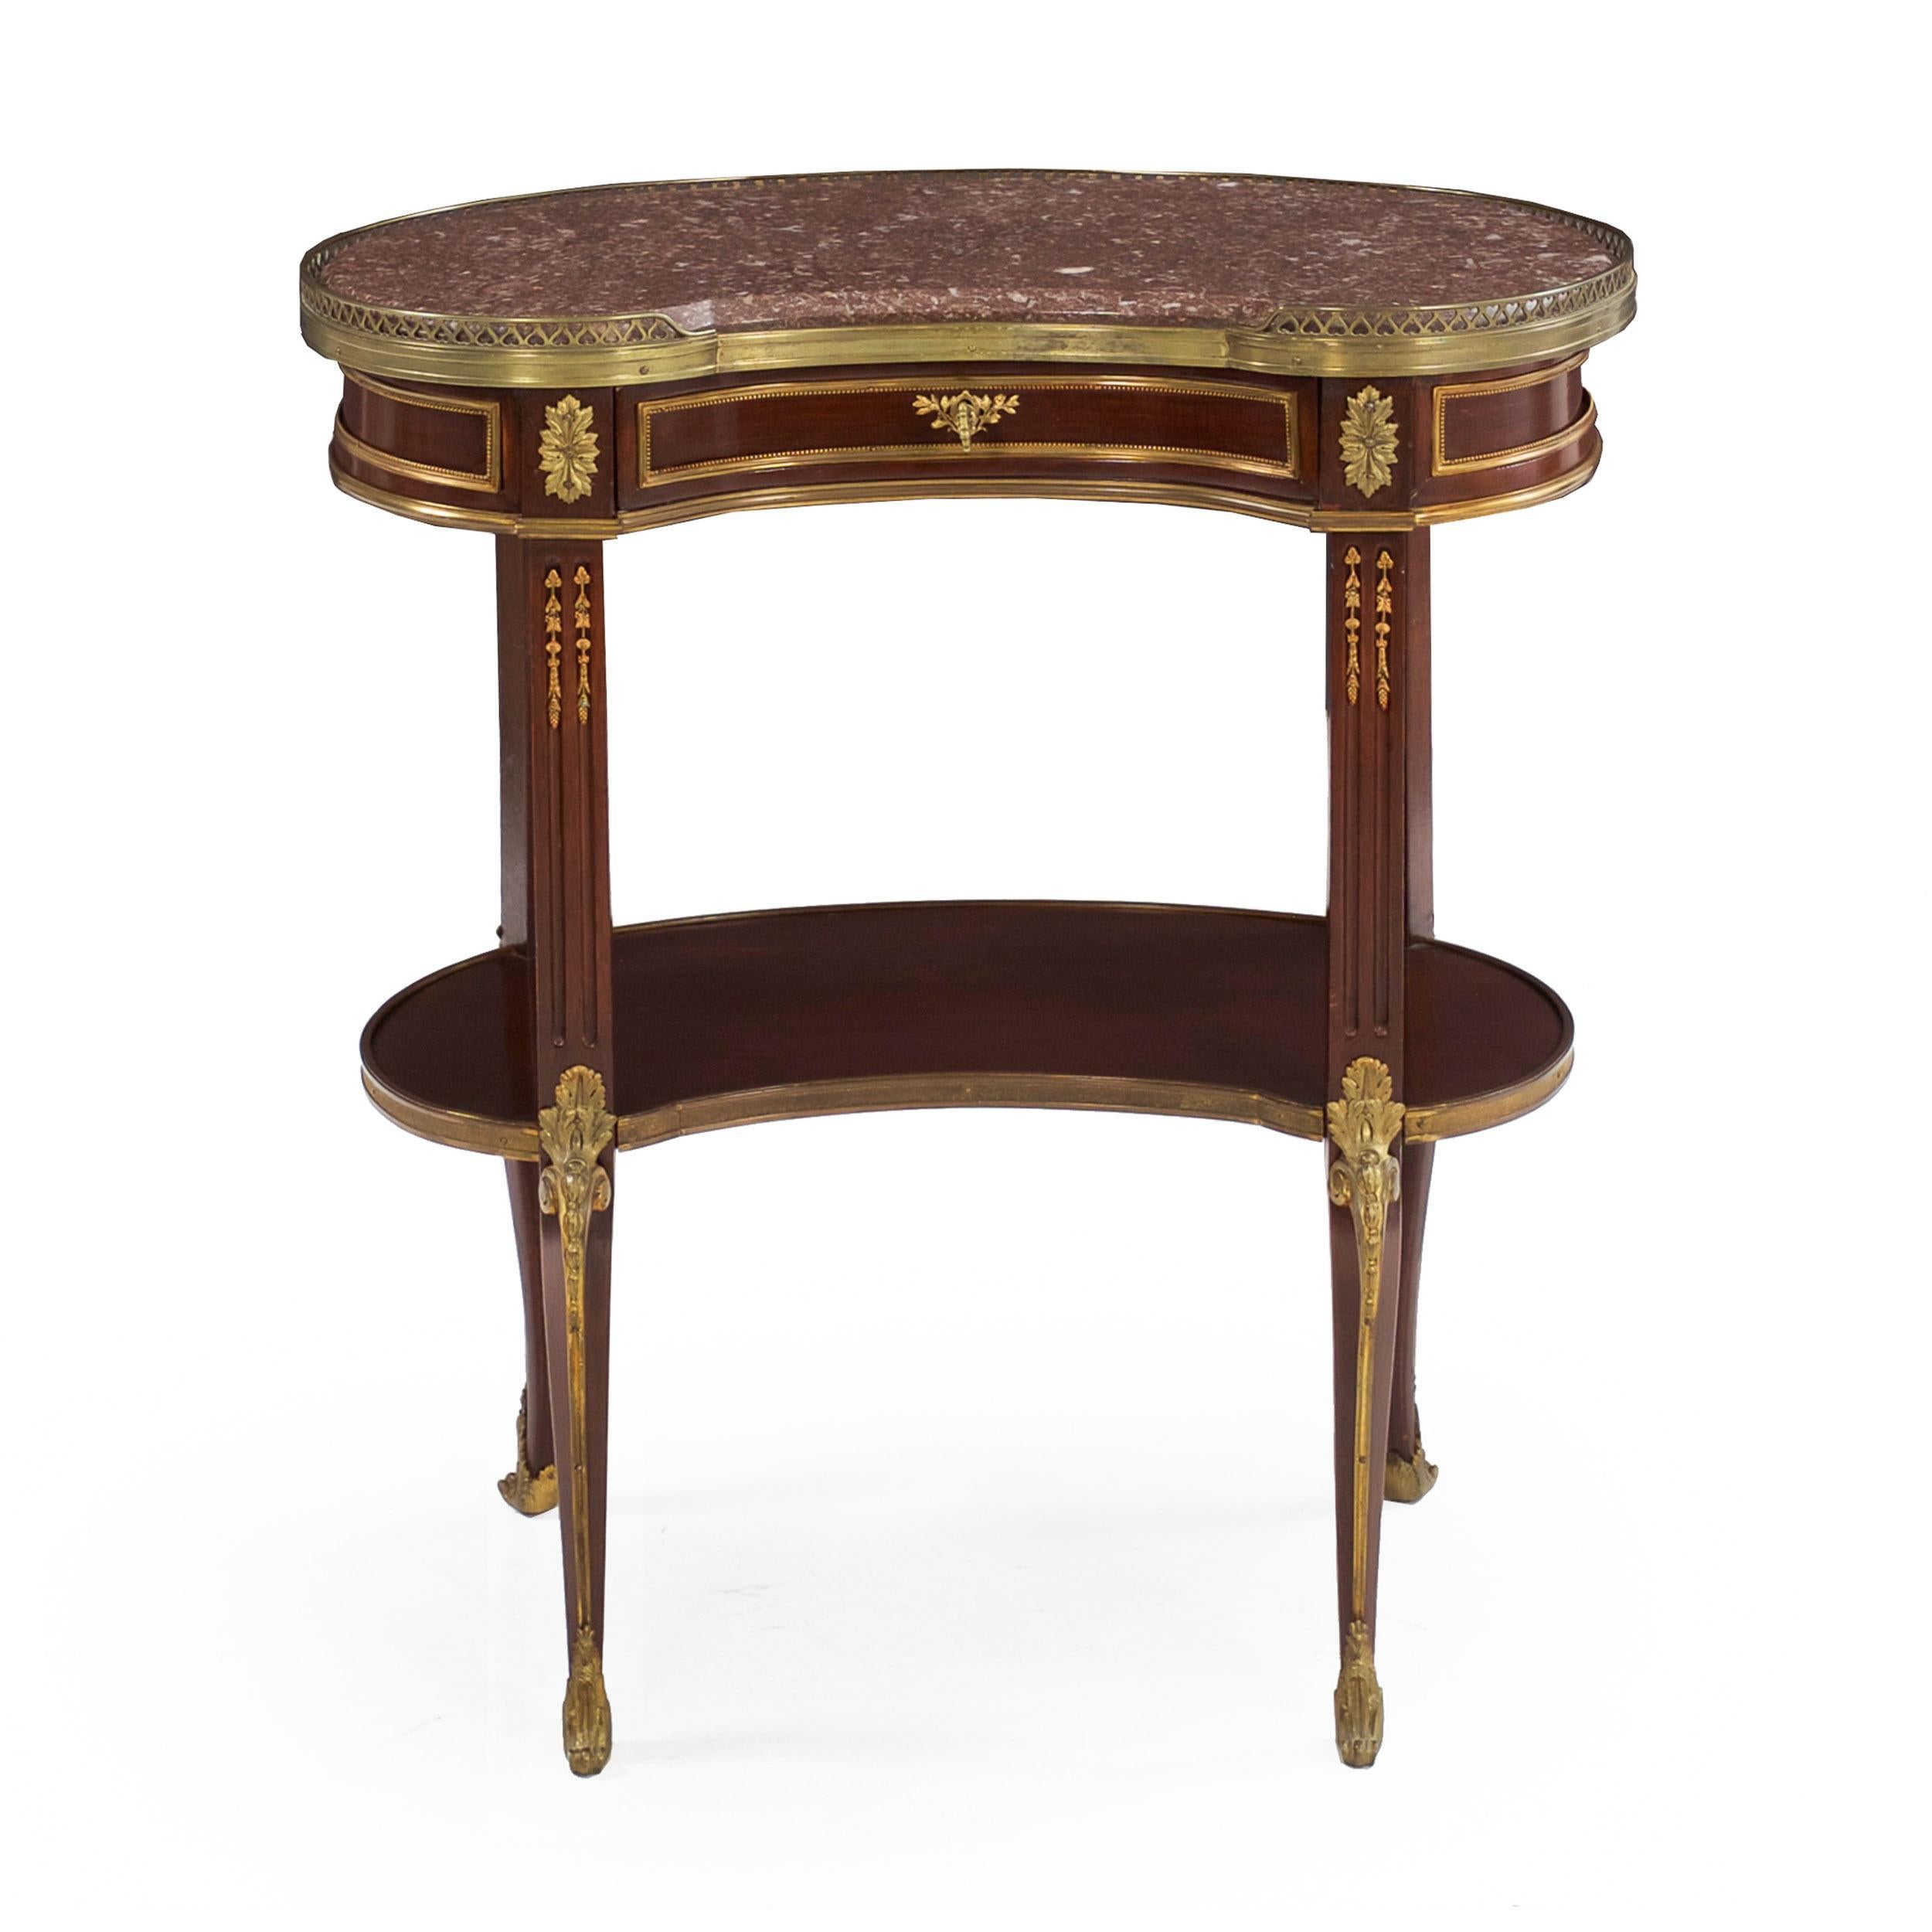 A good early 20th century accent table in the French Louis XV taste, it is crafted with an overall kidney form, the conforming marble top with a beveled edge set within a pierced brass raised gallery over a single horizontal drawer with